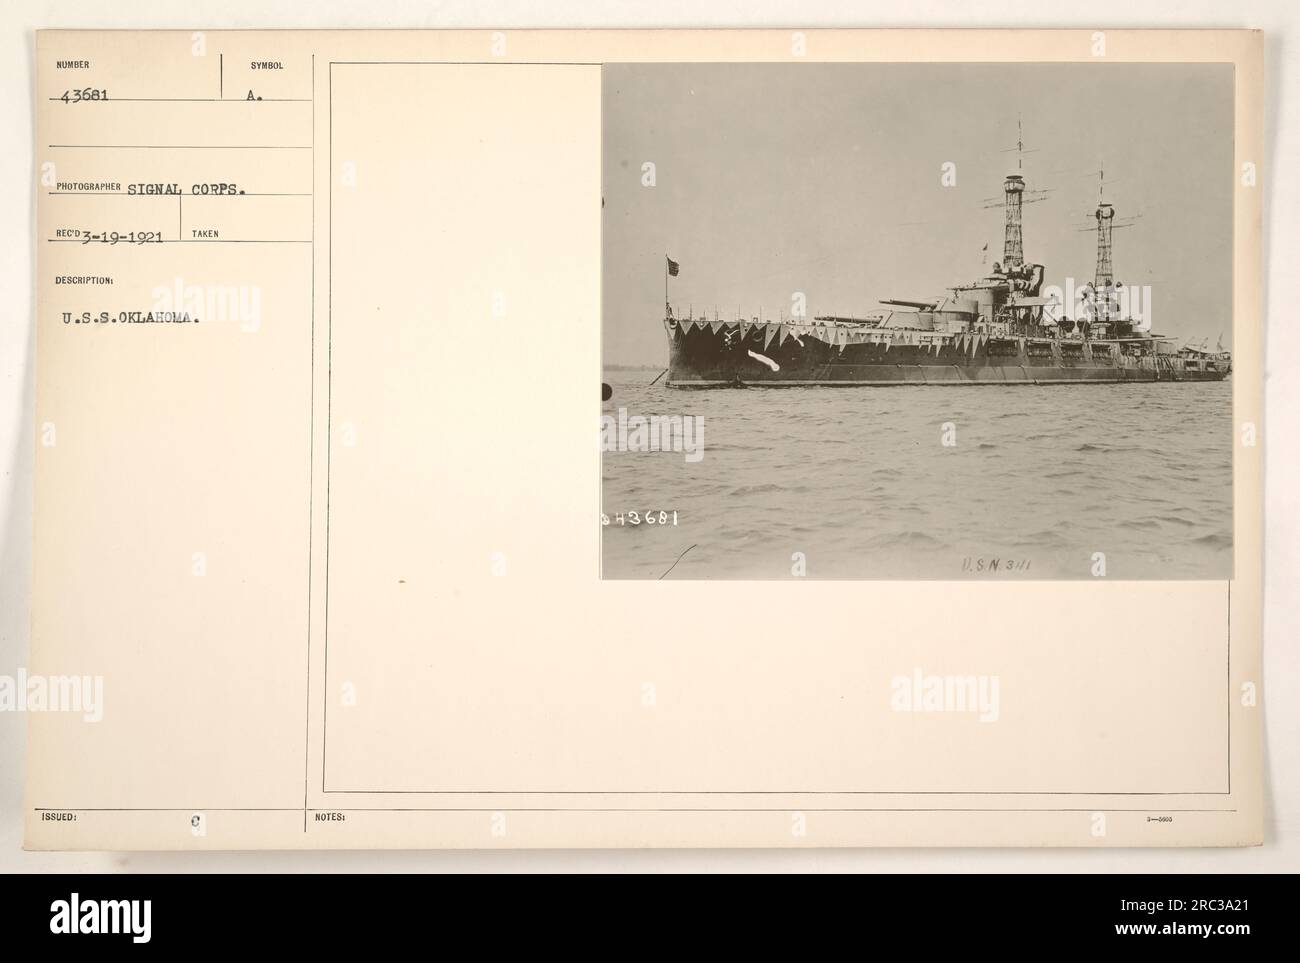 U.S.S. Oklahoma during World War One. This image, numbered 43681 and taken by the Signal Corps photographer, depicts the ship in action. The photo was released on March 19, 1921, and bears the symbol of the A.C. Notes indicate that it features U.S.N. 31/1 Keer. Stock Photo